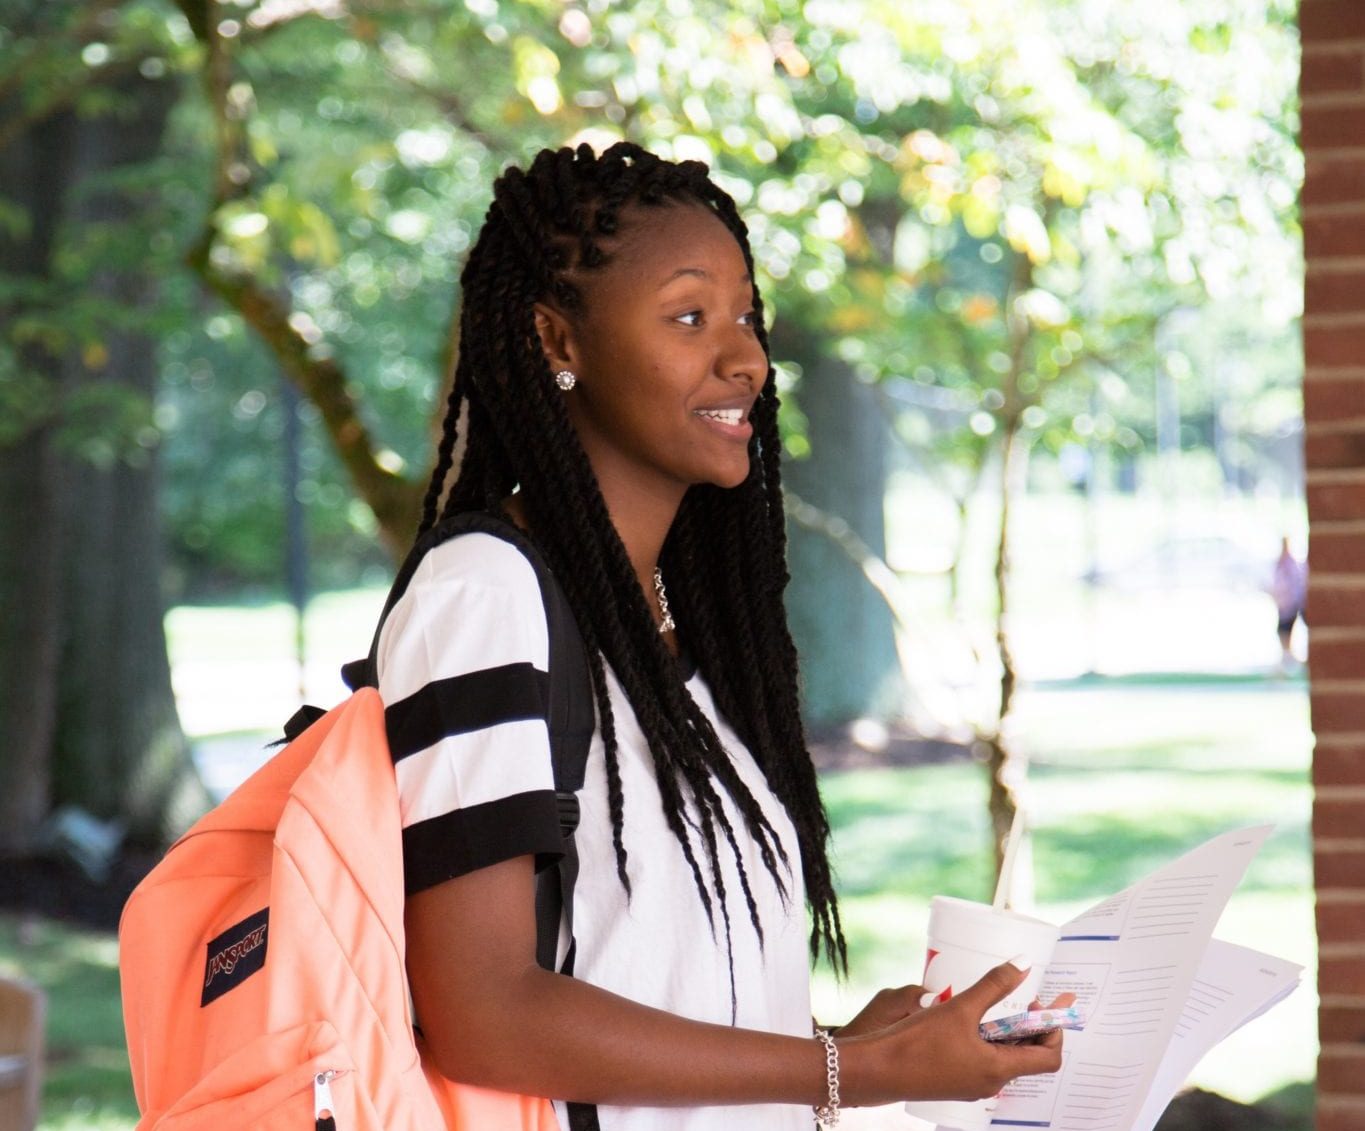 Black female college student with backpack